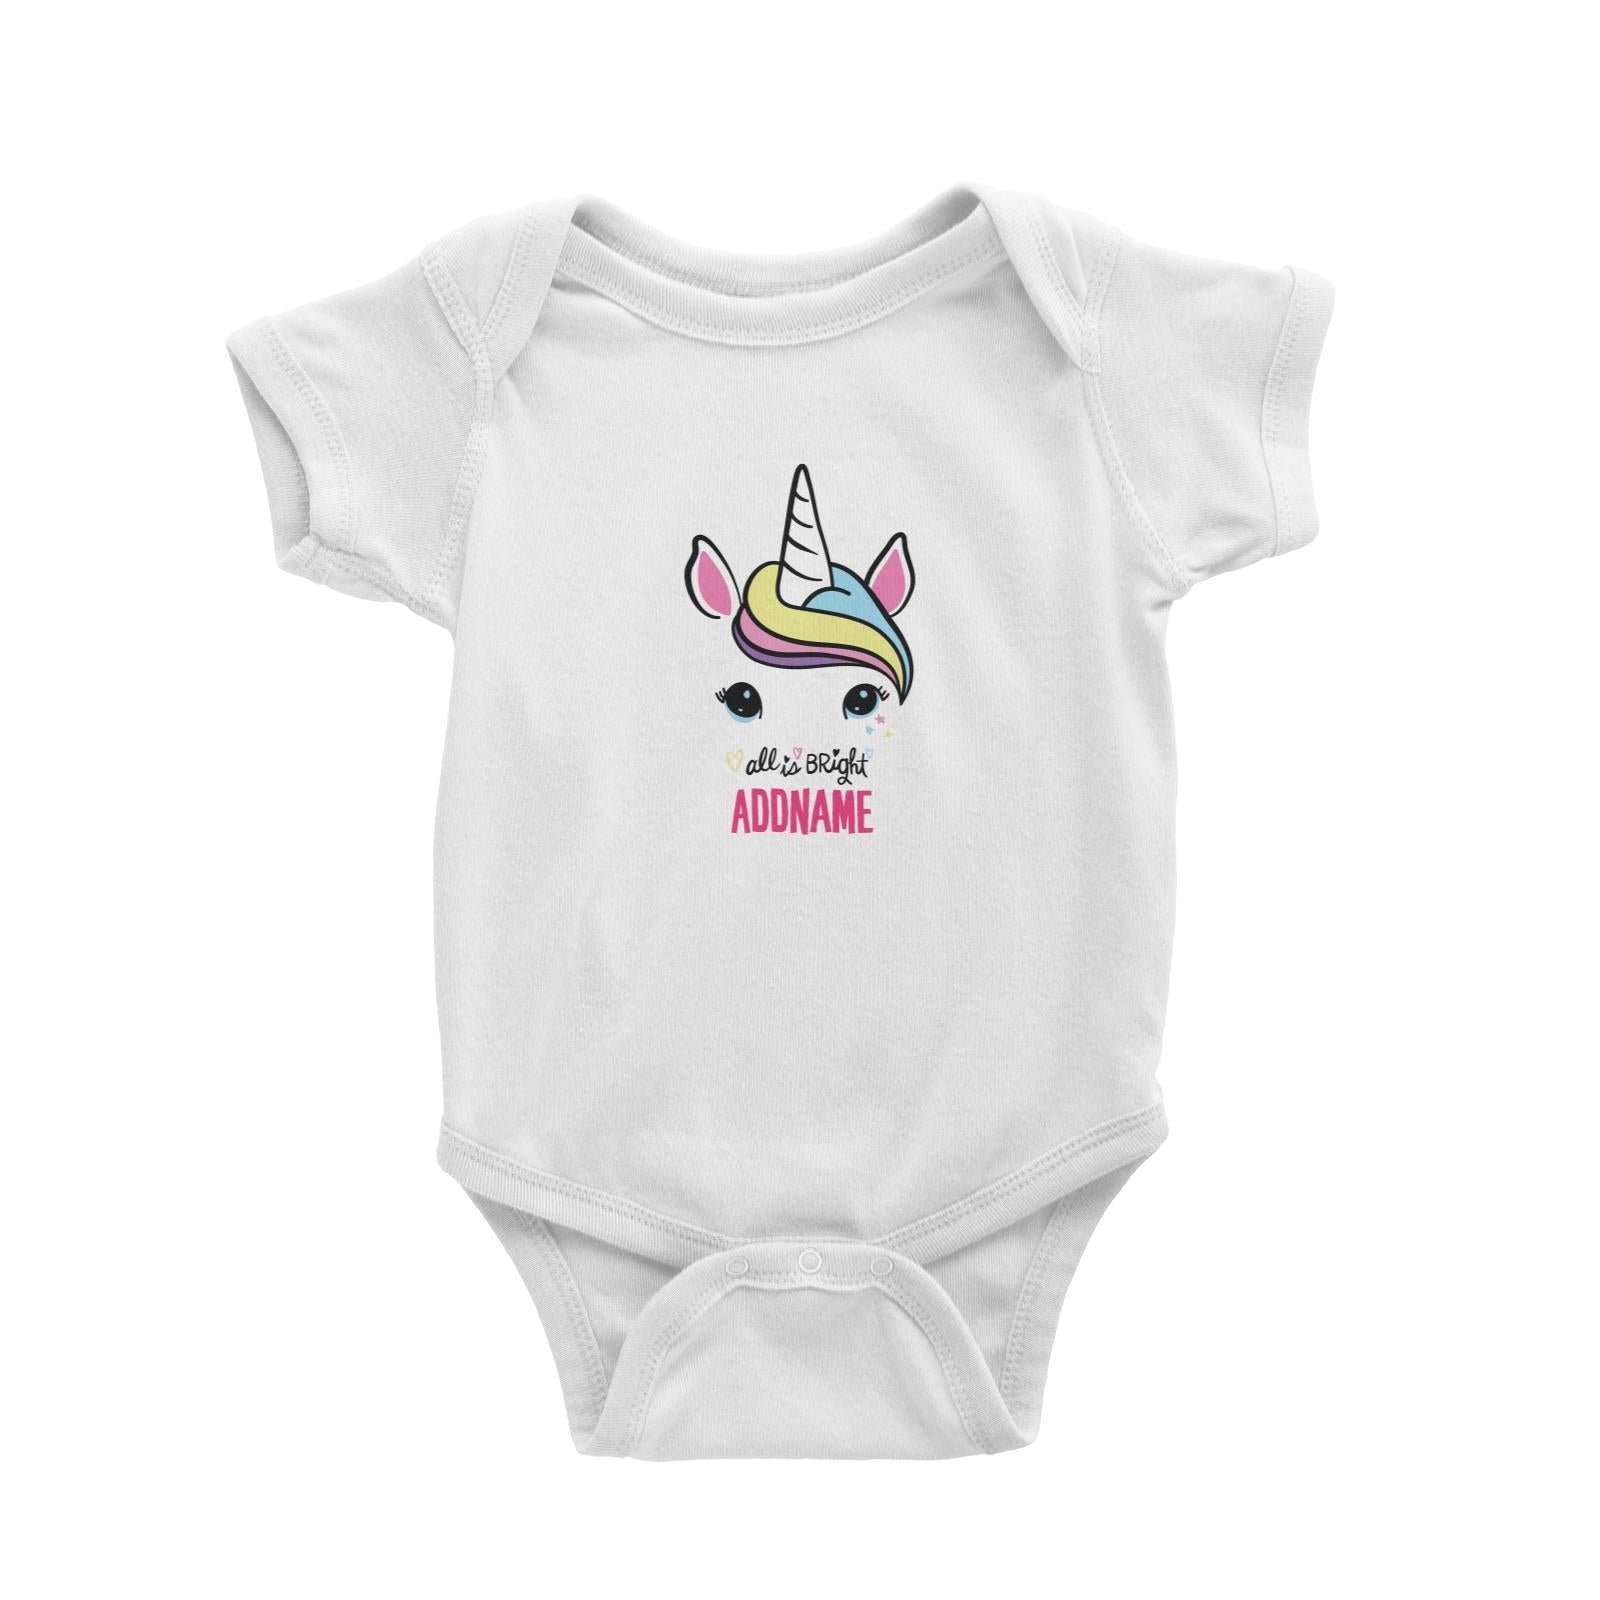 Cool Vibrant Series Unicorn Face All Is Bright Addname Baby Romper [SALE]